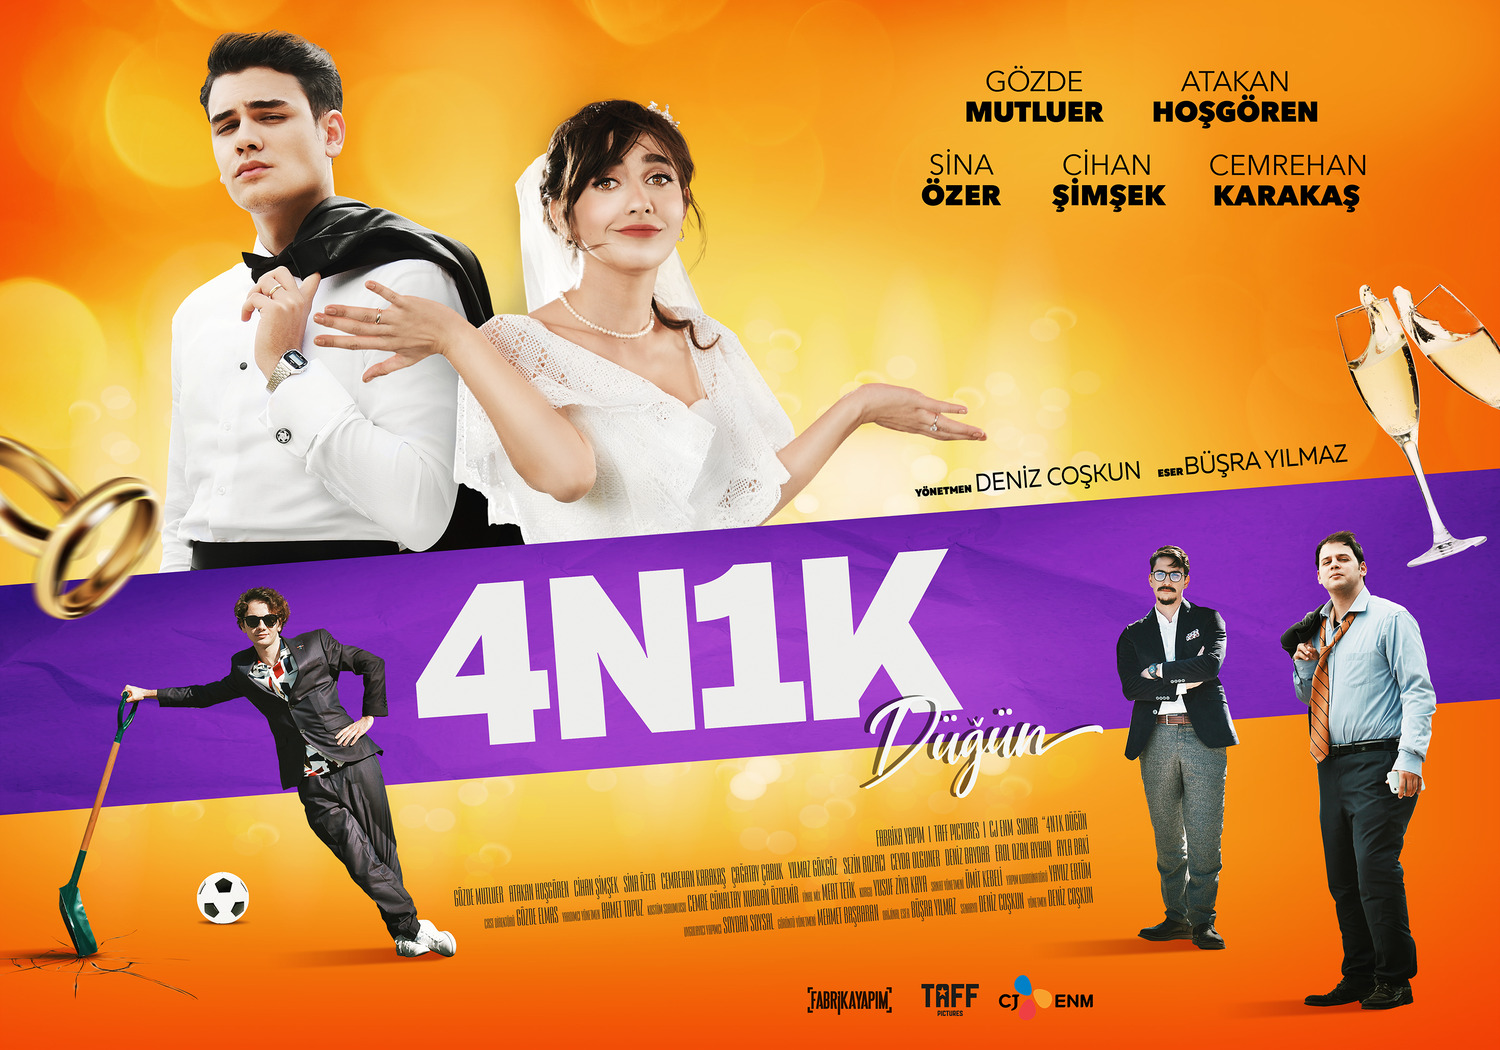 Extra Large Movie Poster Image for 4N1K Dügün (#2 of 2)